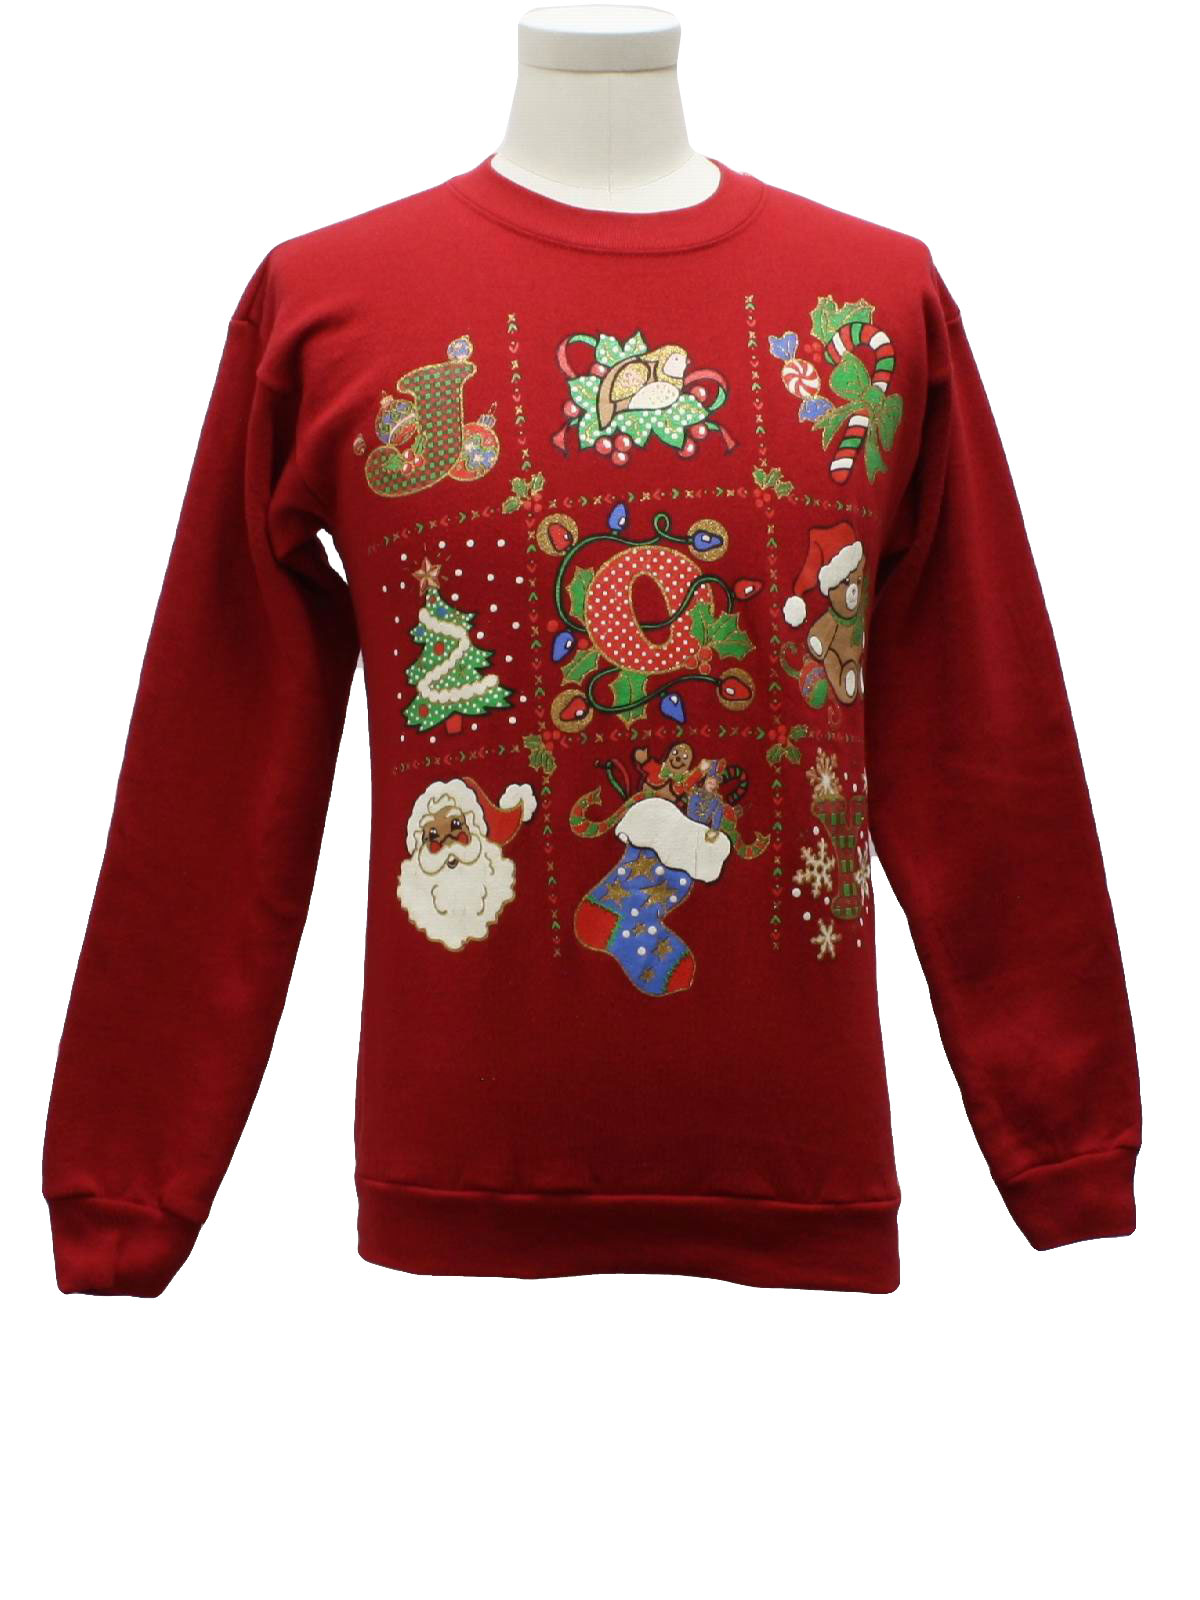 Womens Ugly Christmas Sweatshirt: -MBC- Womens red background cotton ...